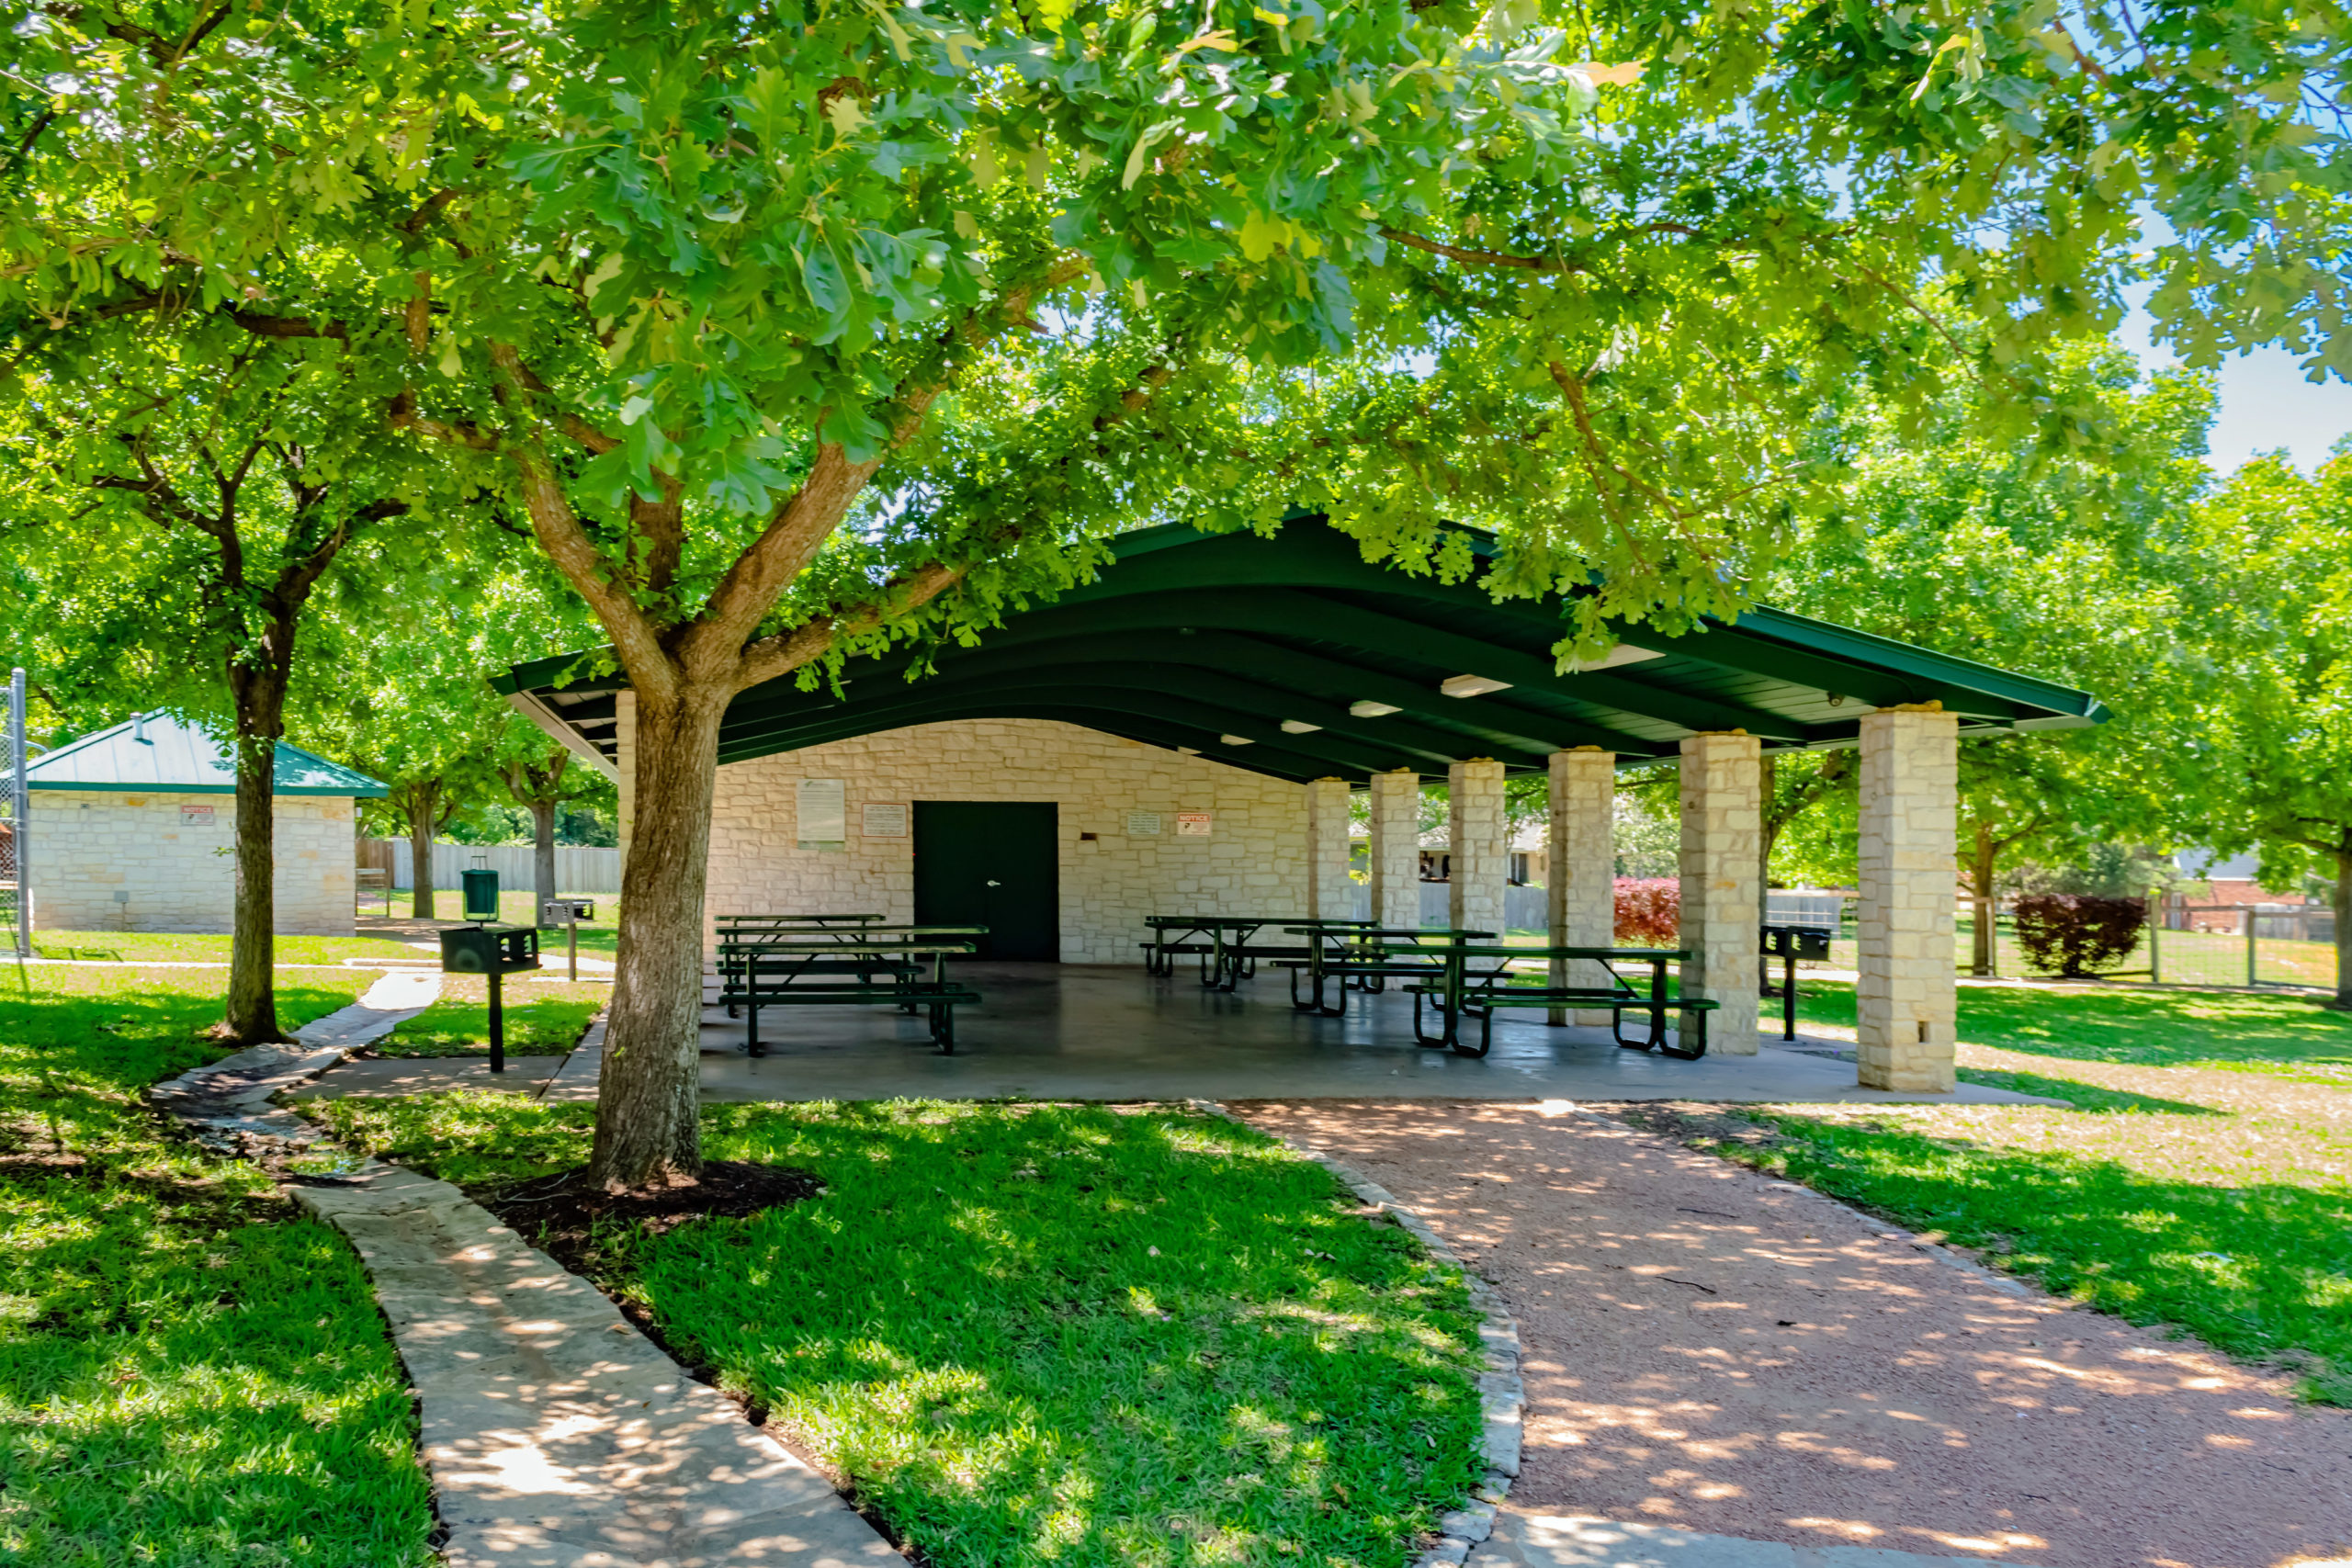 Picture of the covered pavilion and tables.